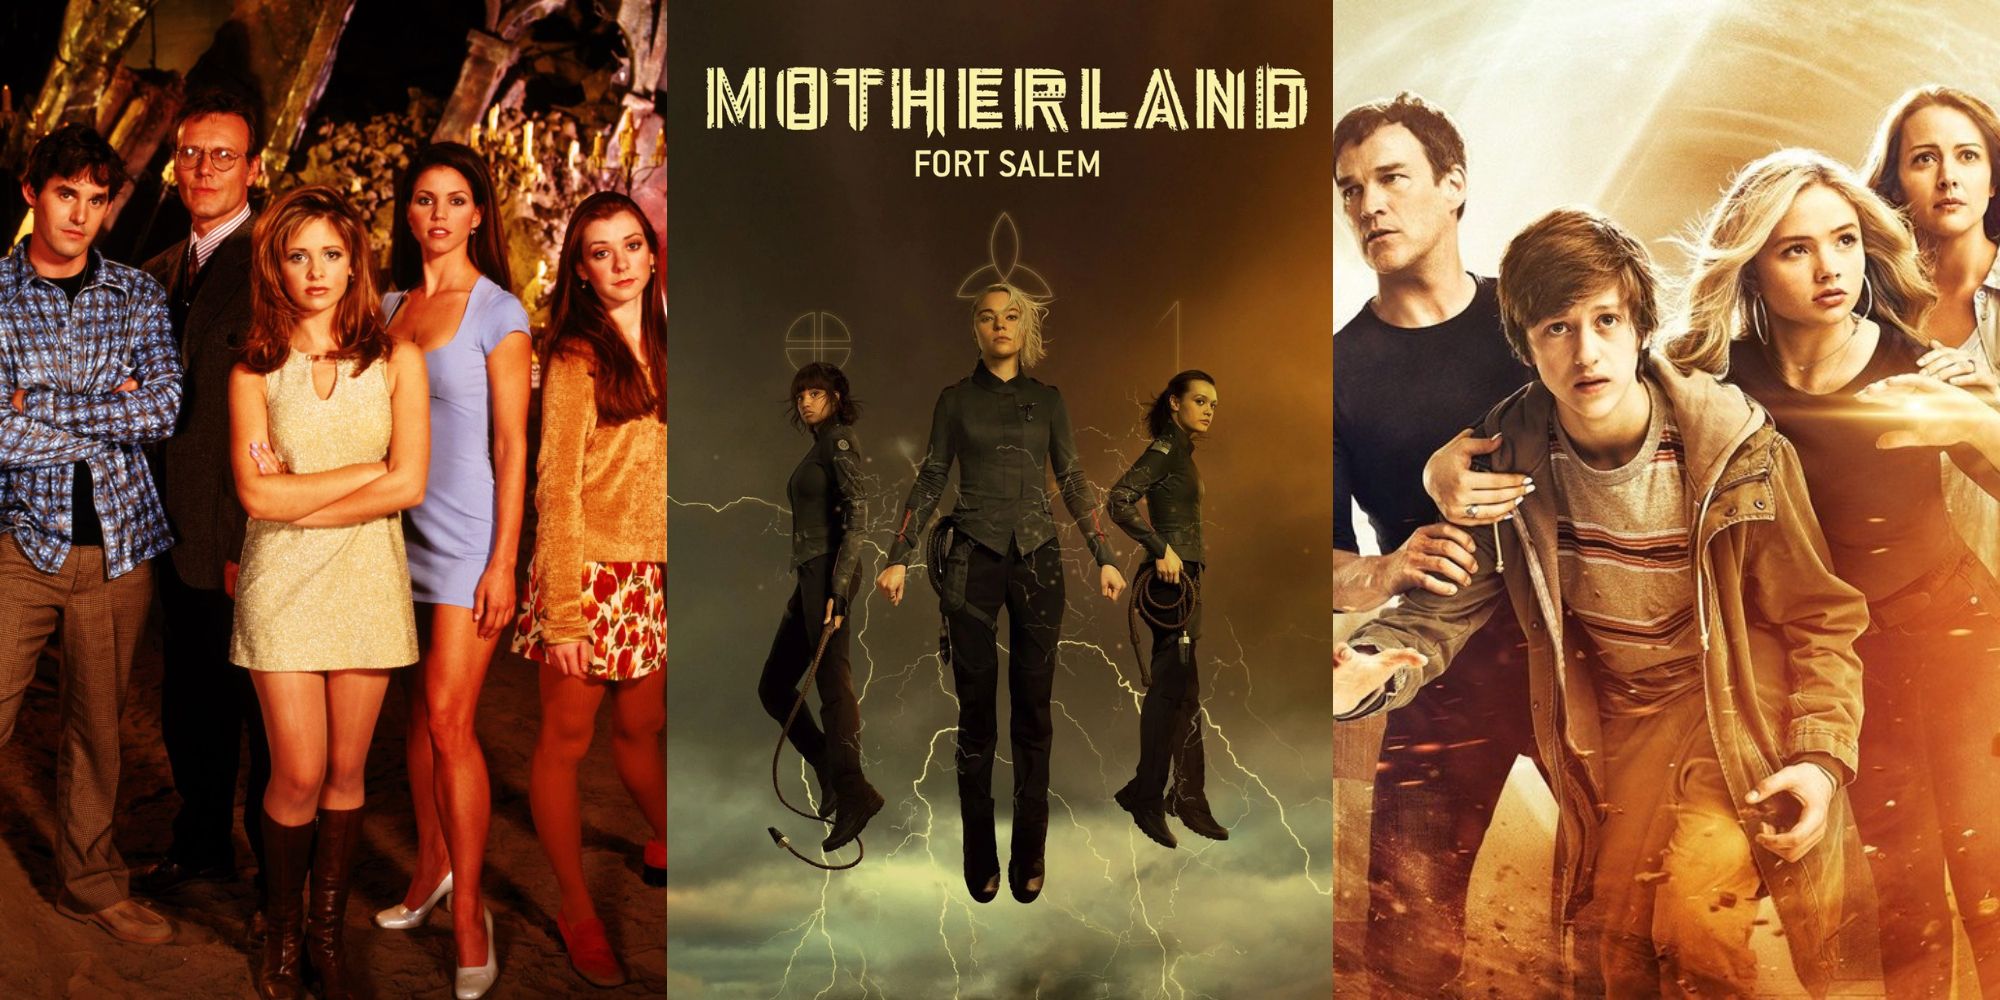 Posters for Buffy, Motherland, and The Gifted